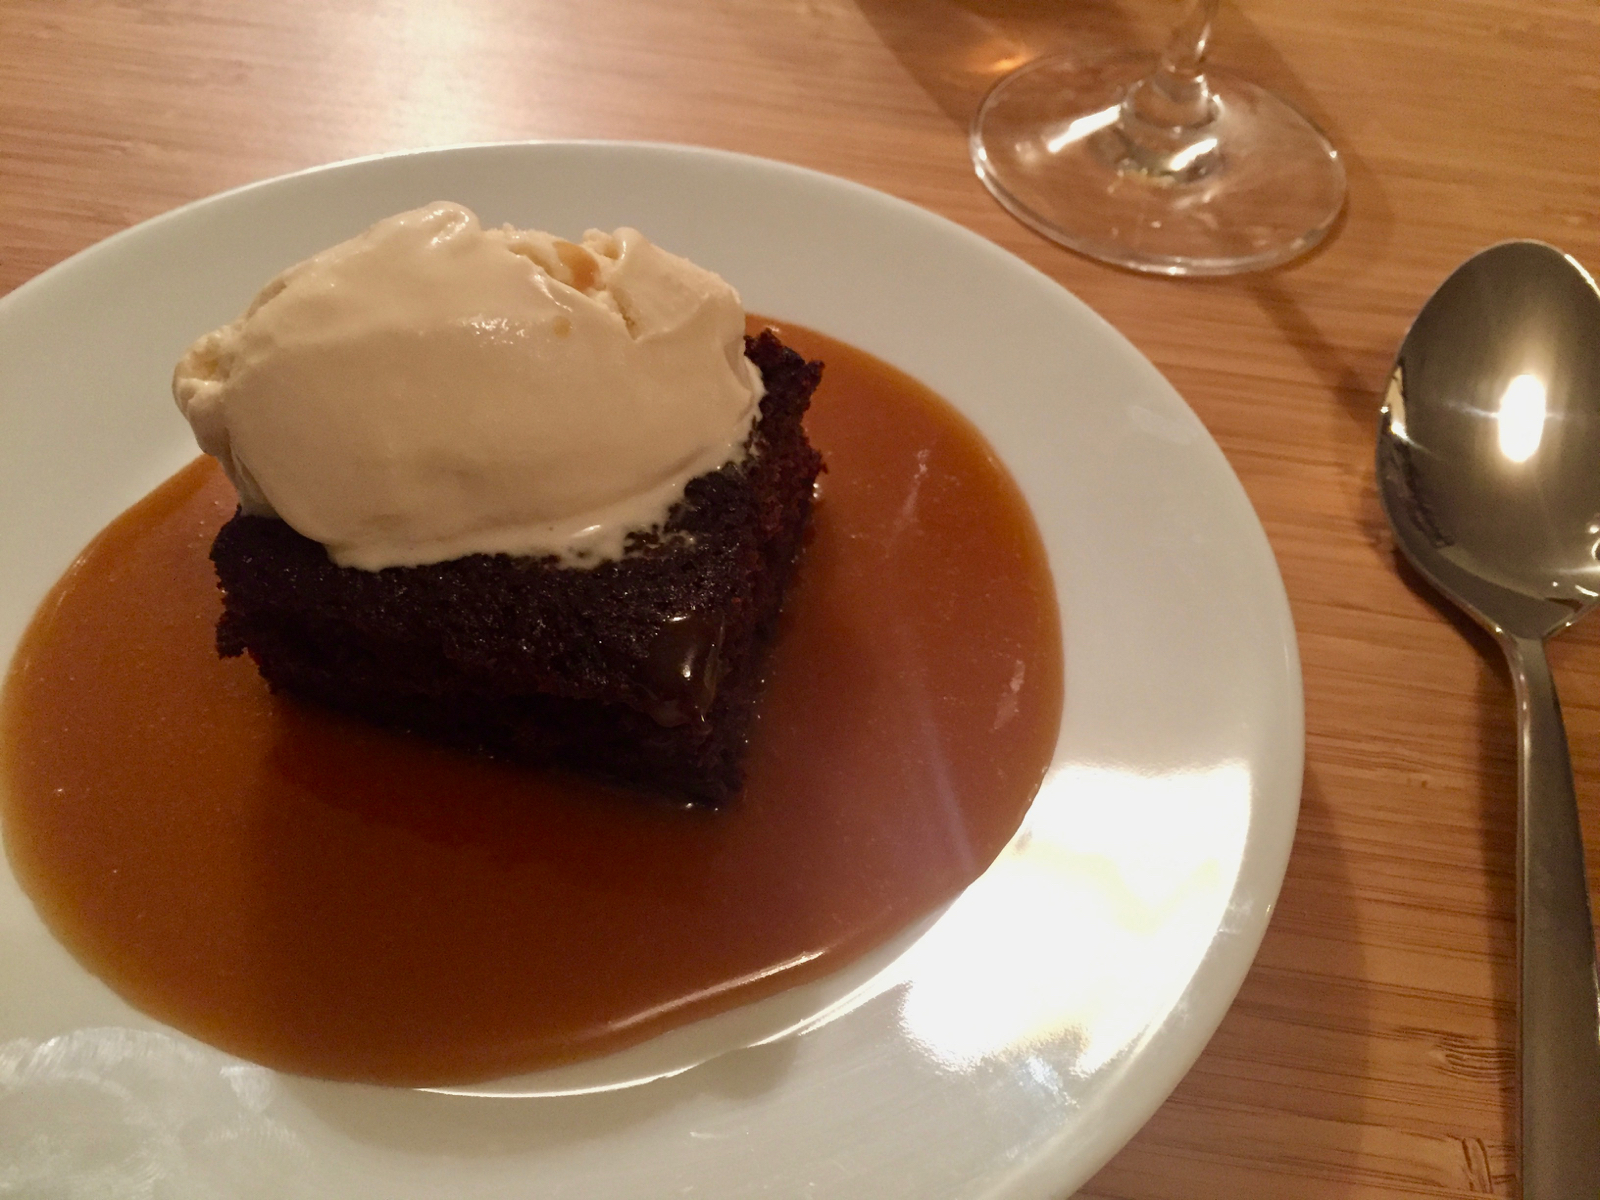 Whole Milk Club - Sticky Toffee Pudding and Whisky Ice Cream